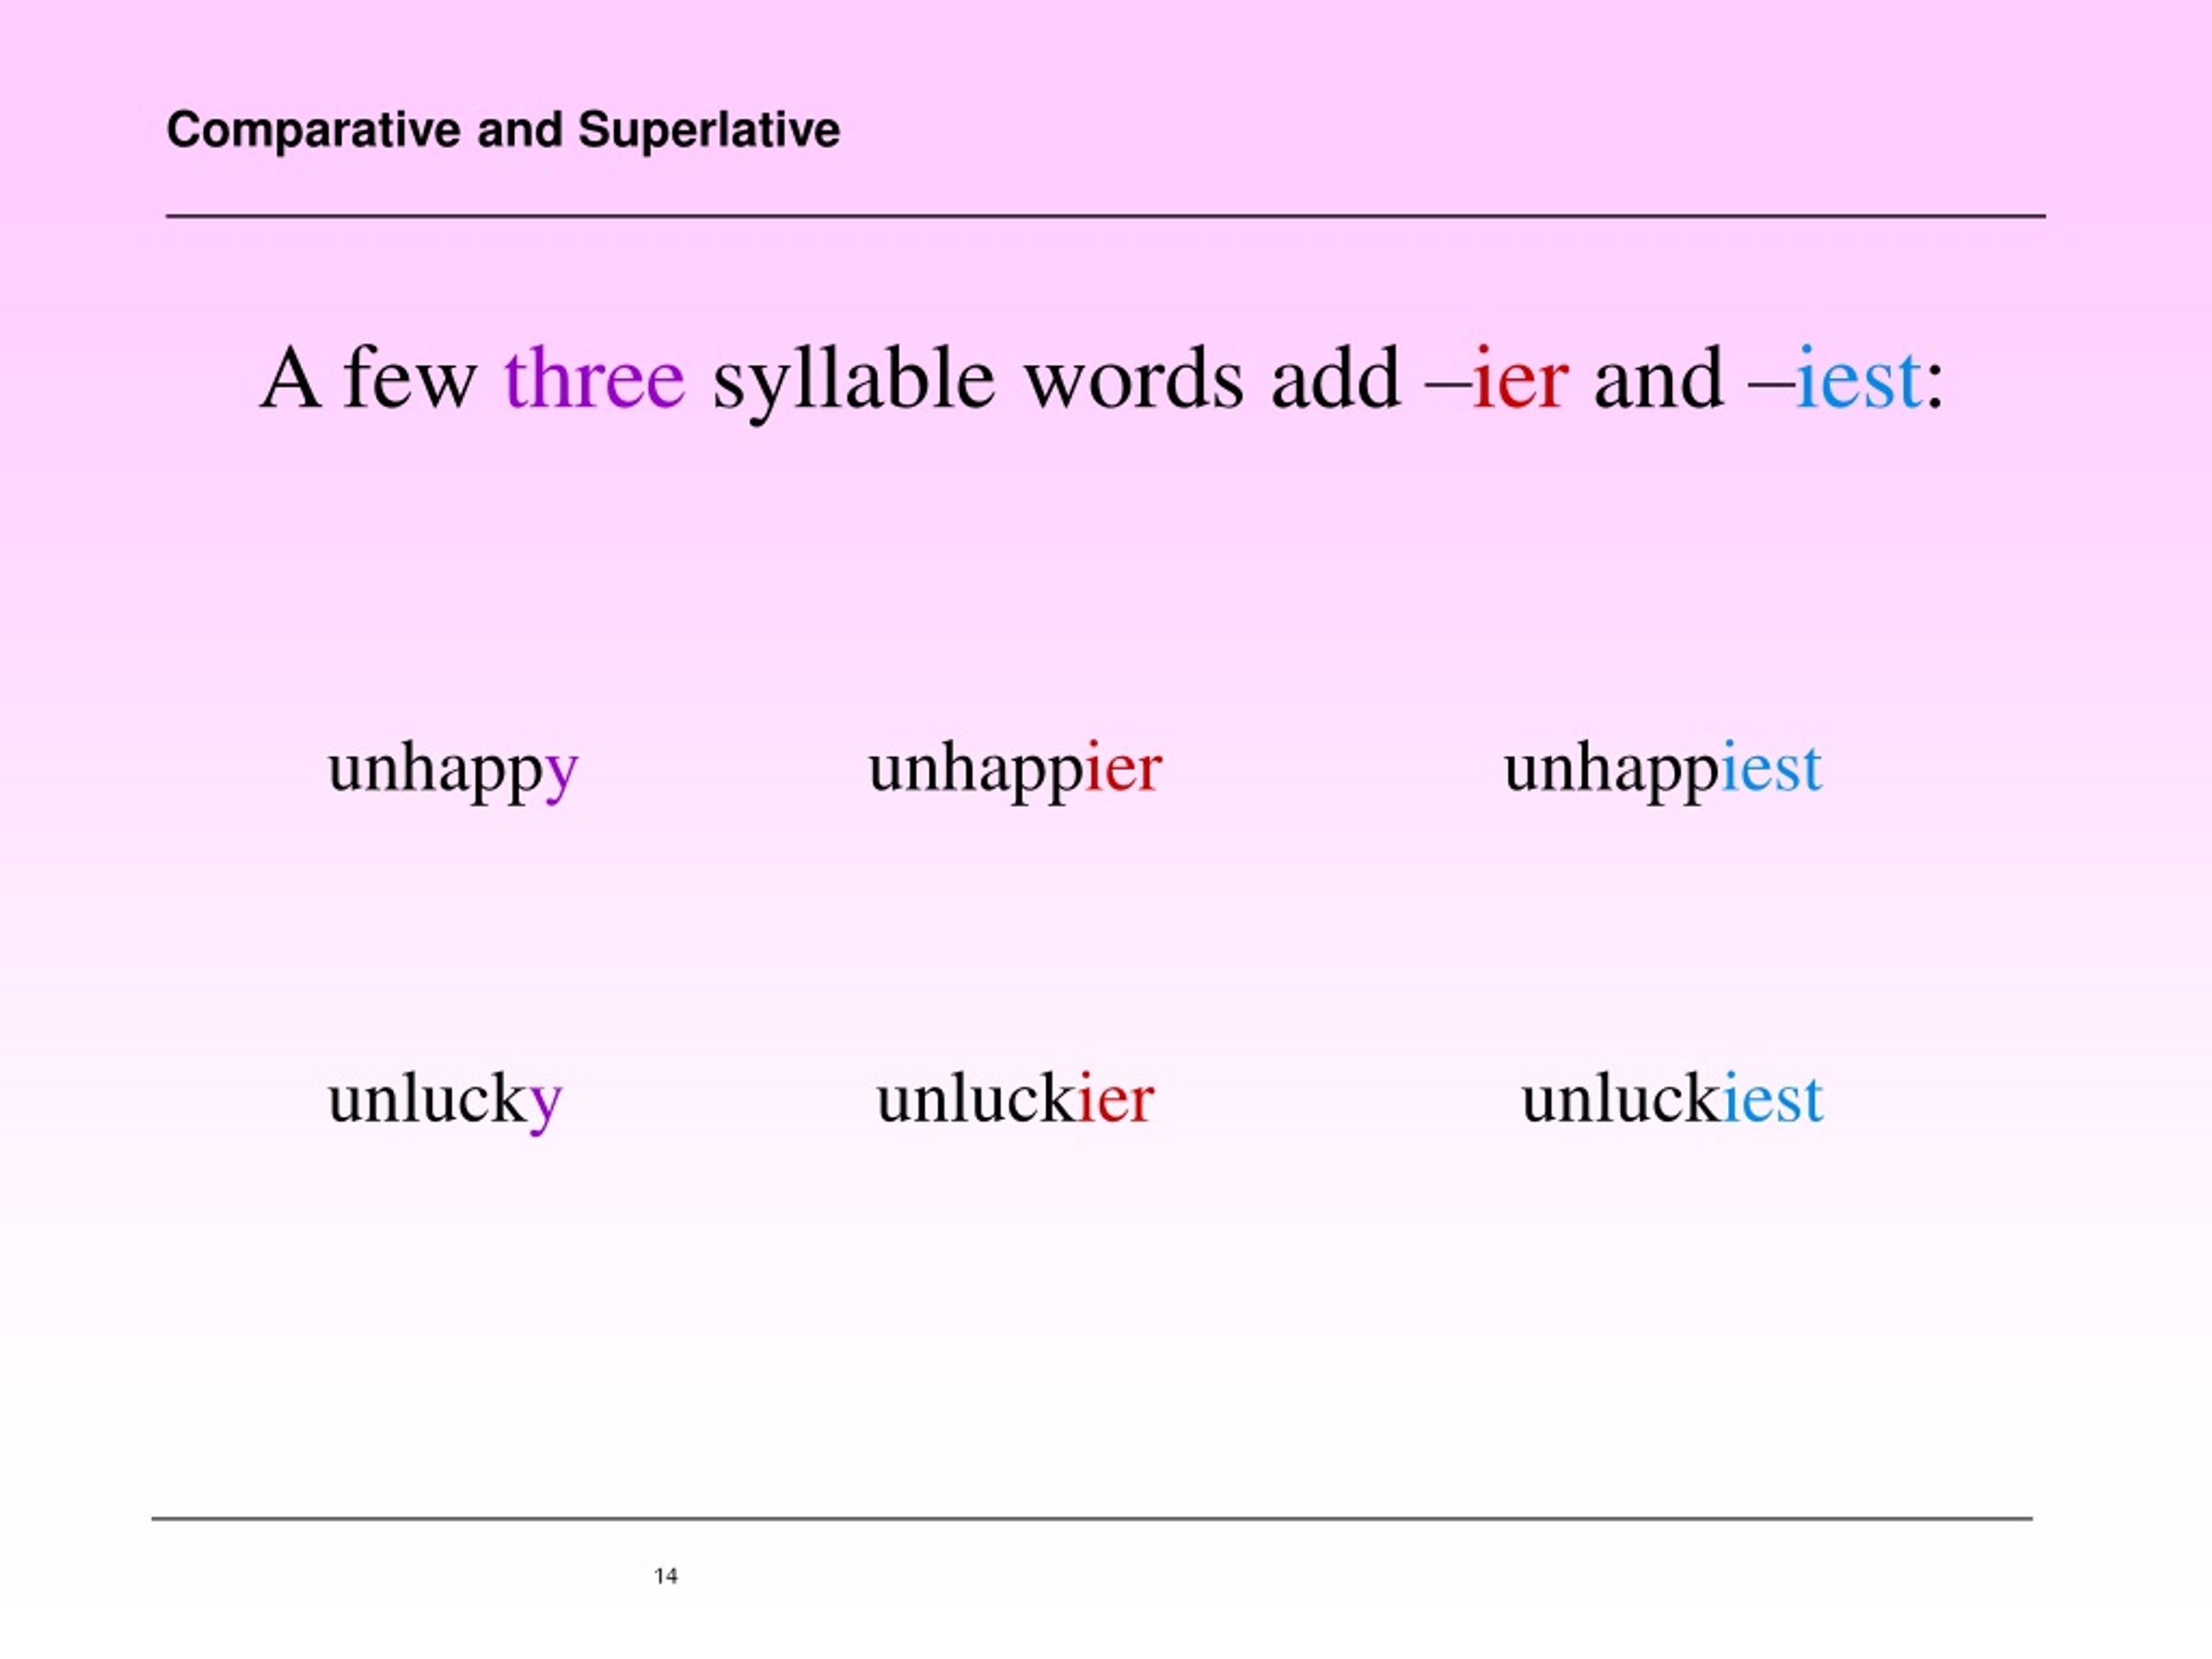 Funny comparative and superlative. Comparatives and Superlatives. Предложения Comparative and Superlative. Few Comparative and Superlative. Comparative and Superlatives упражнения 3 syllables.